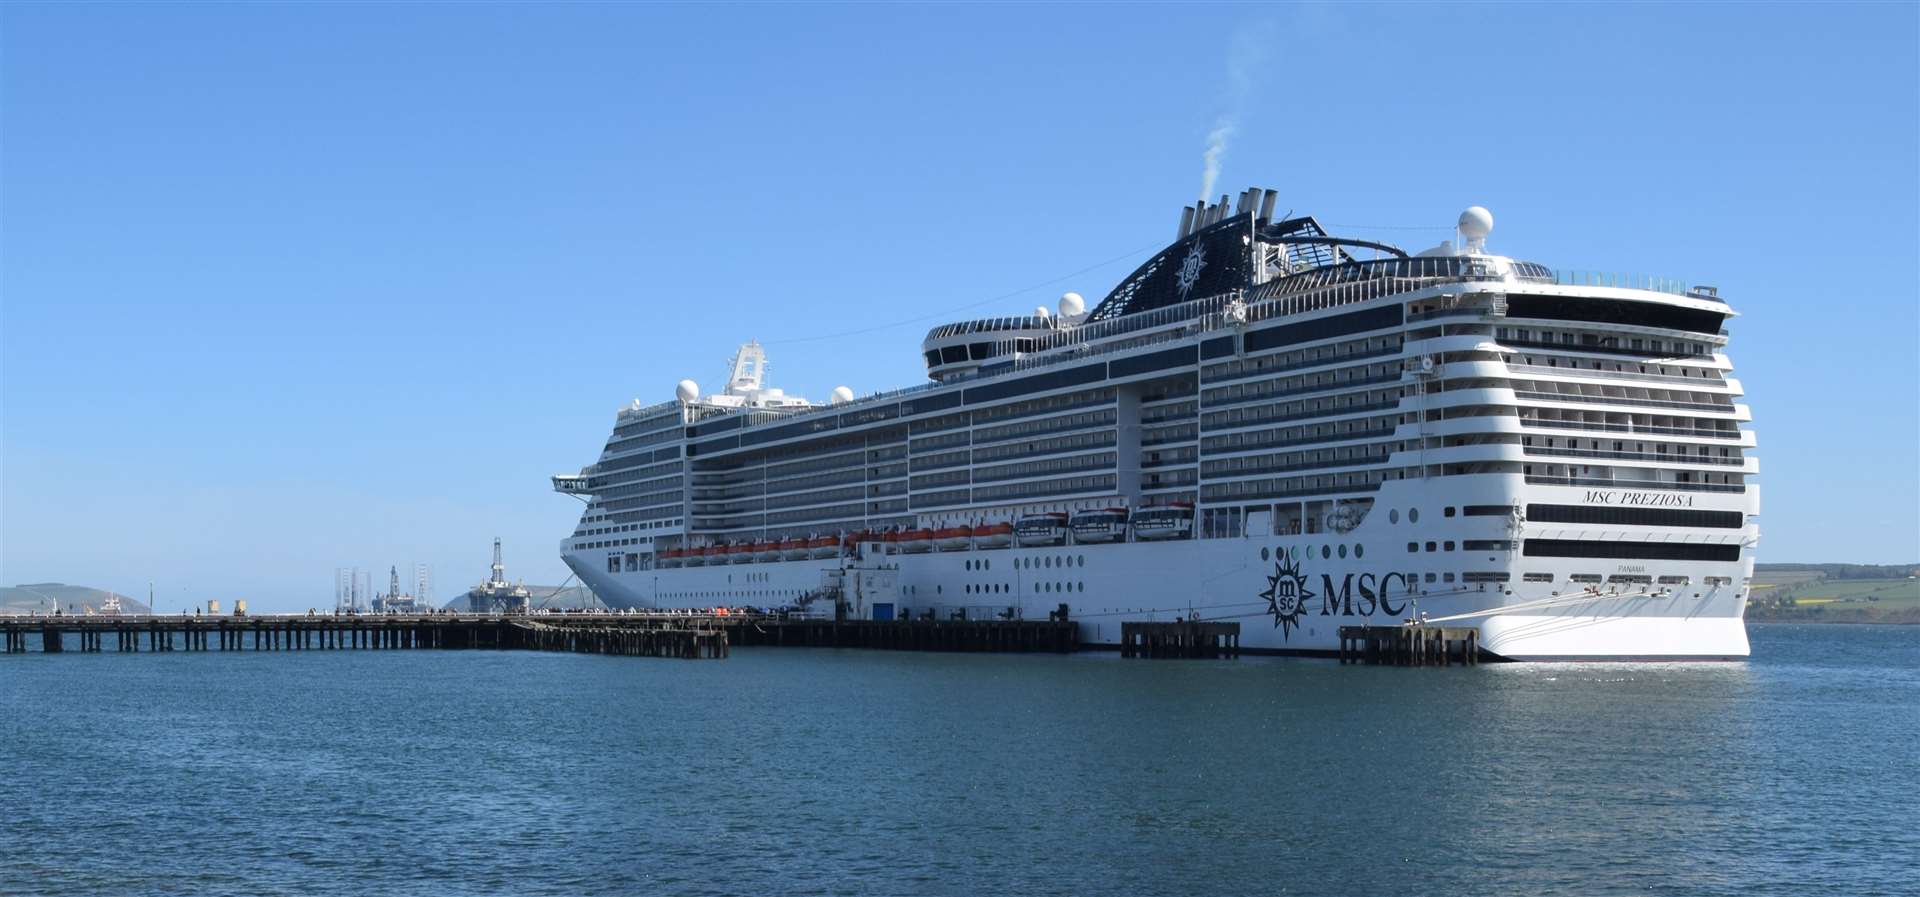 The MSC Preziosa at Invergordon during its debut appearance in the Firth.